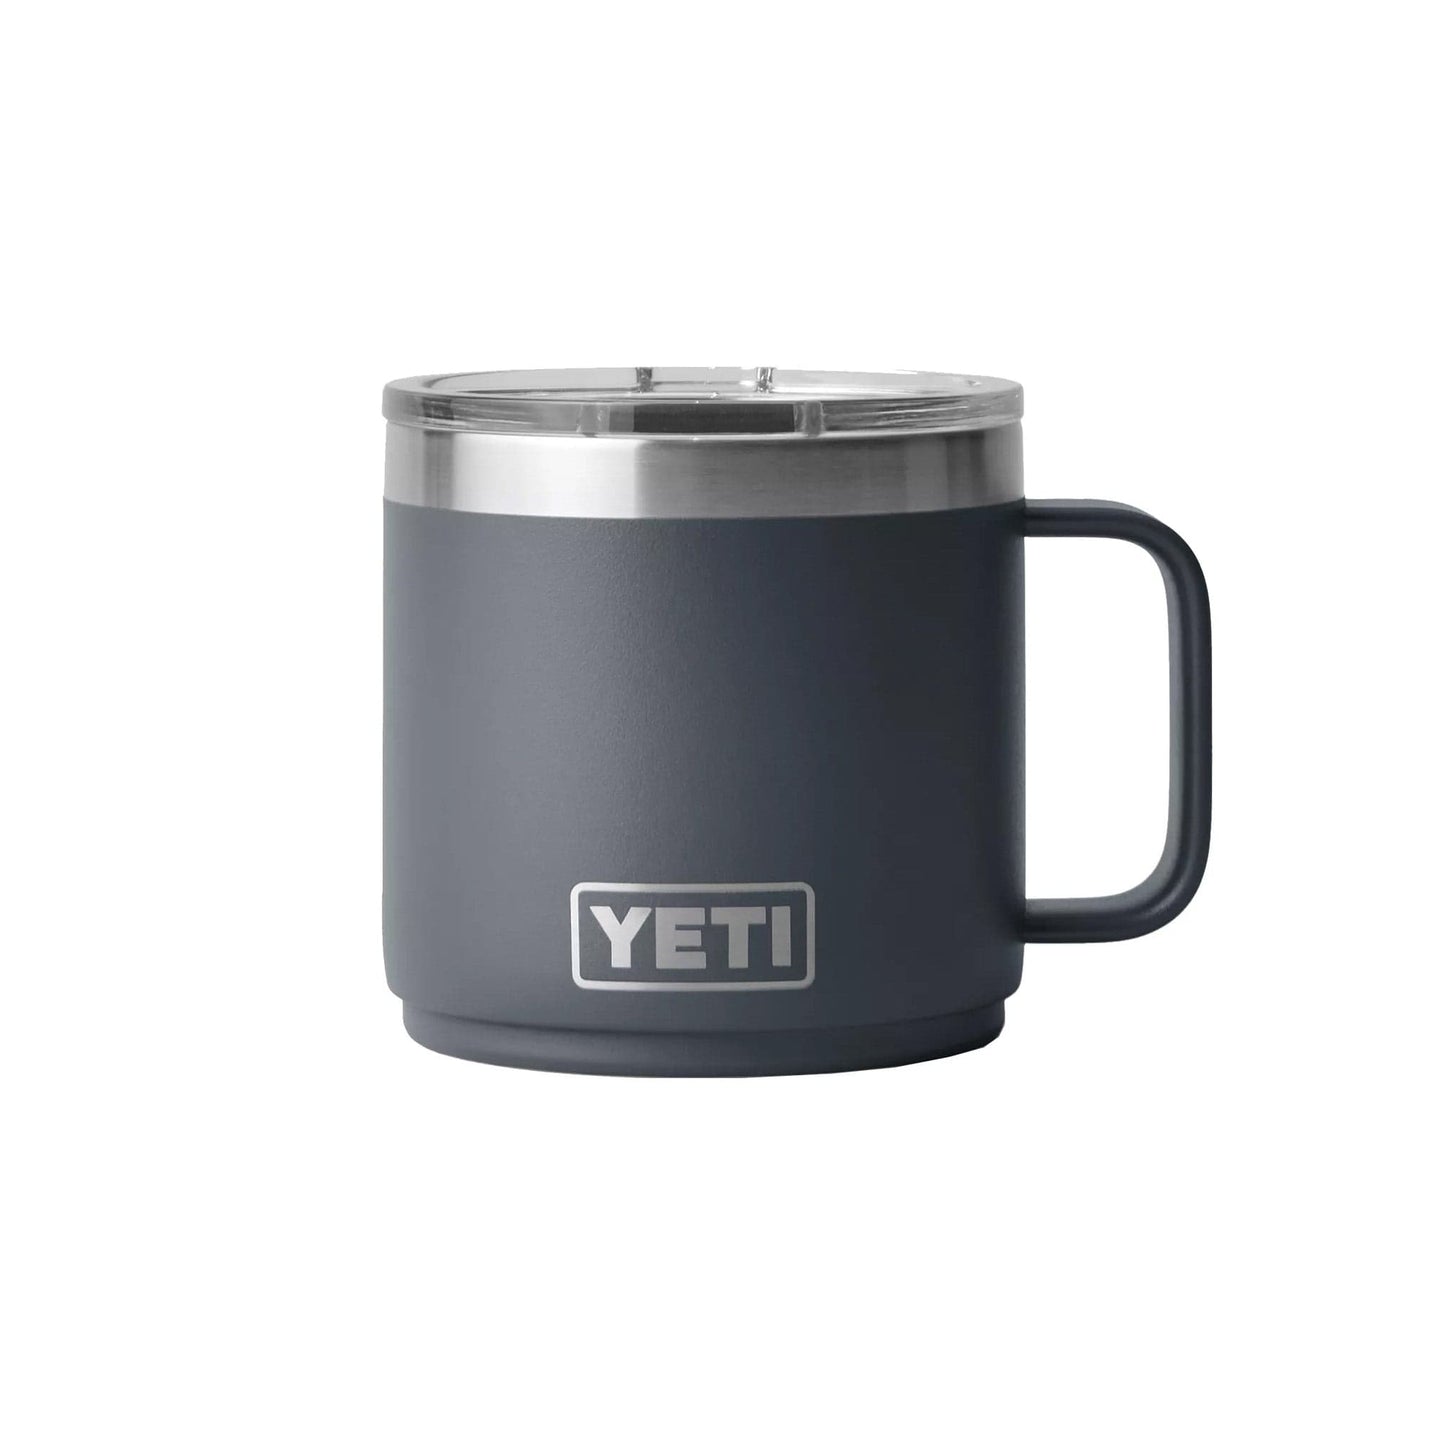 The Yeti Rambler Is the Best Mug Ever Made